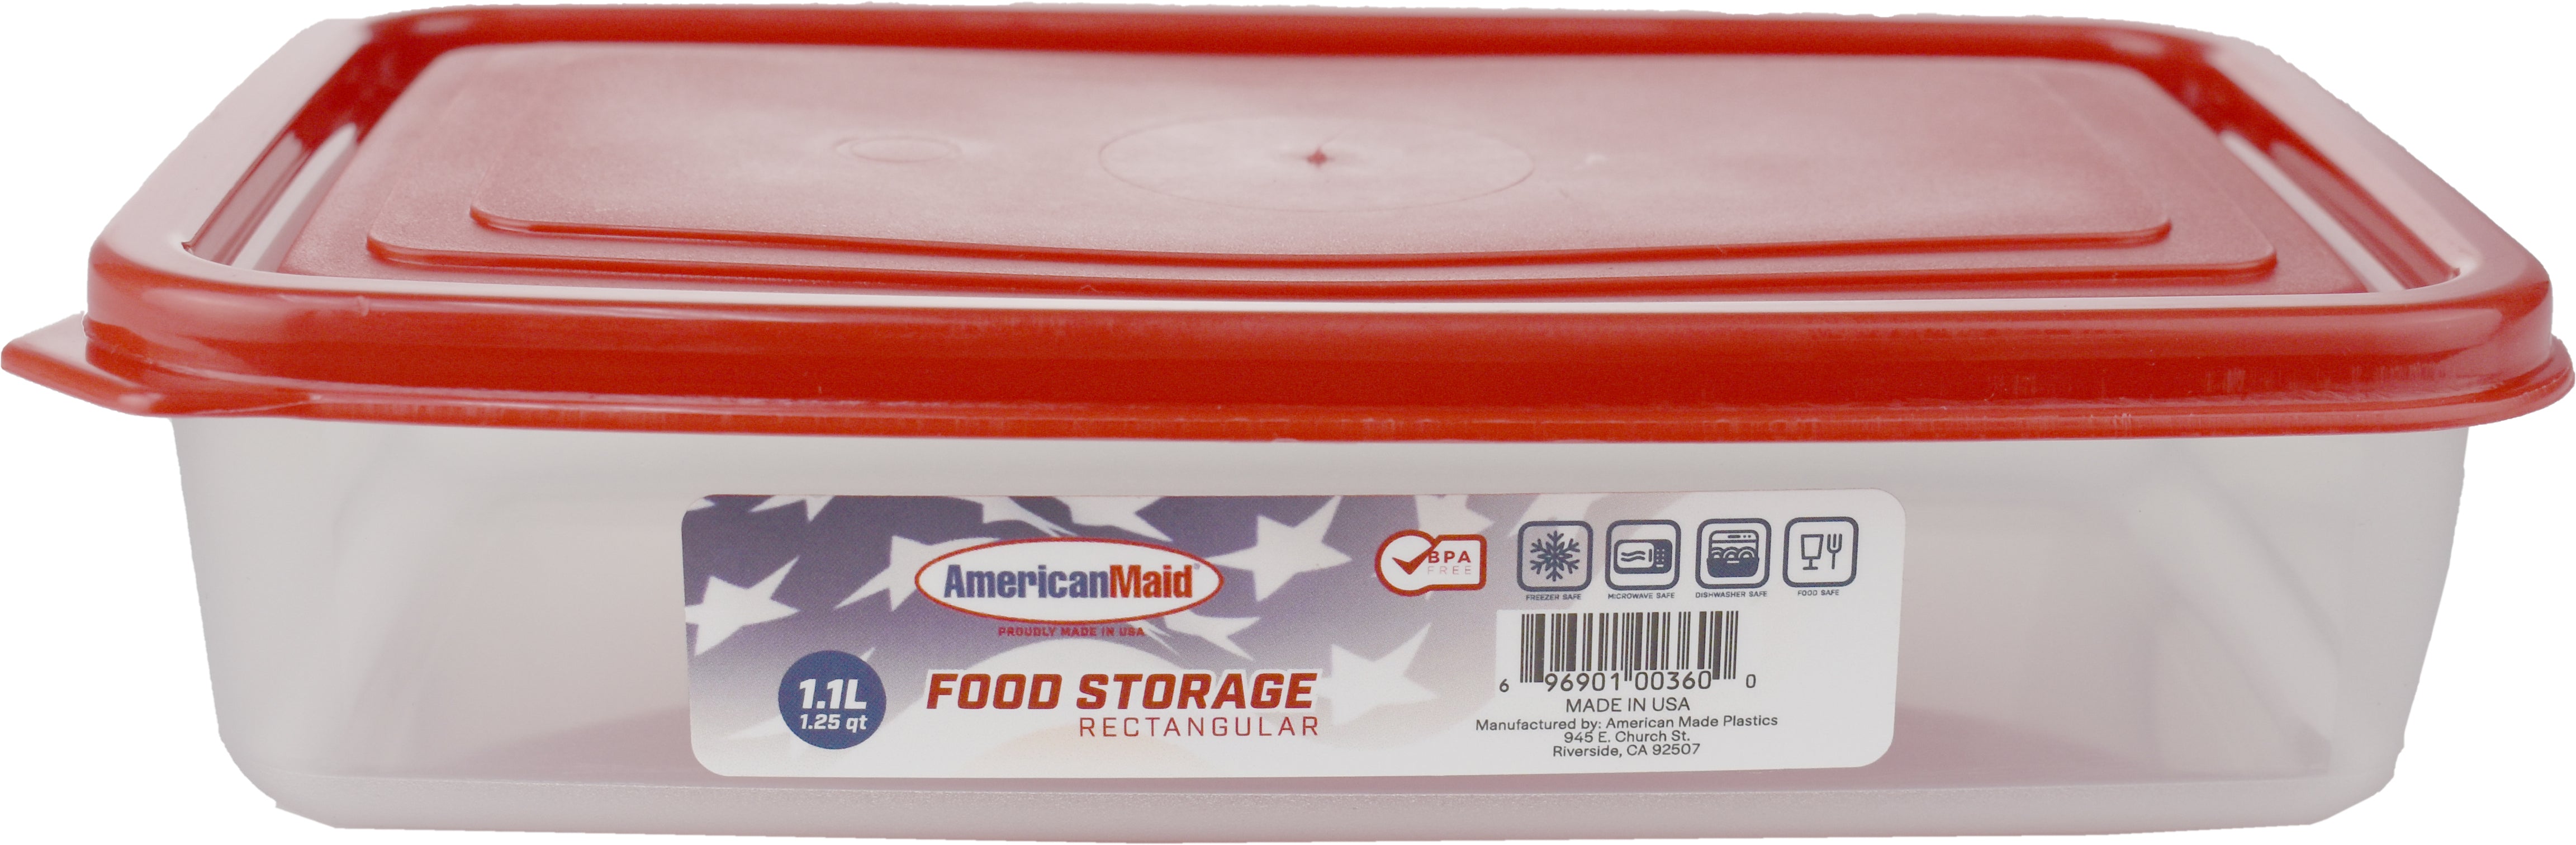 Rubbermaid Brilliance Egg Food Storage Container, Red, Clear